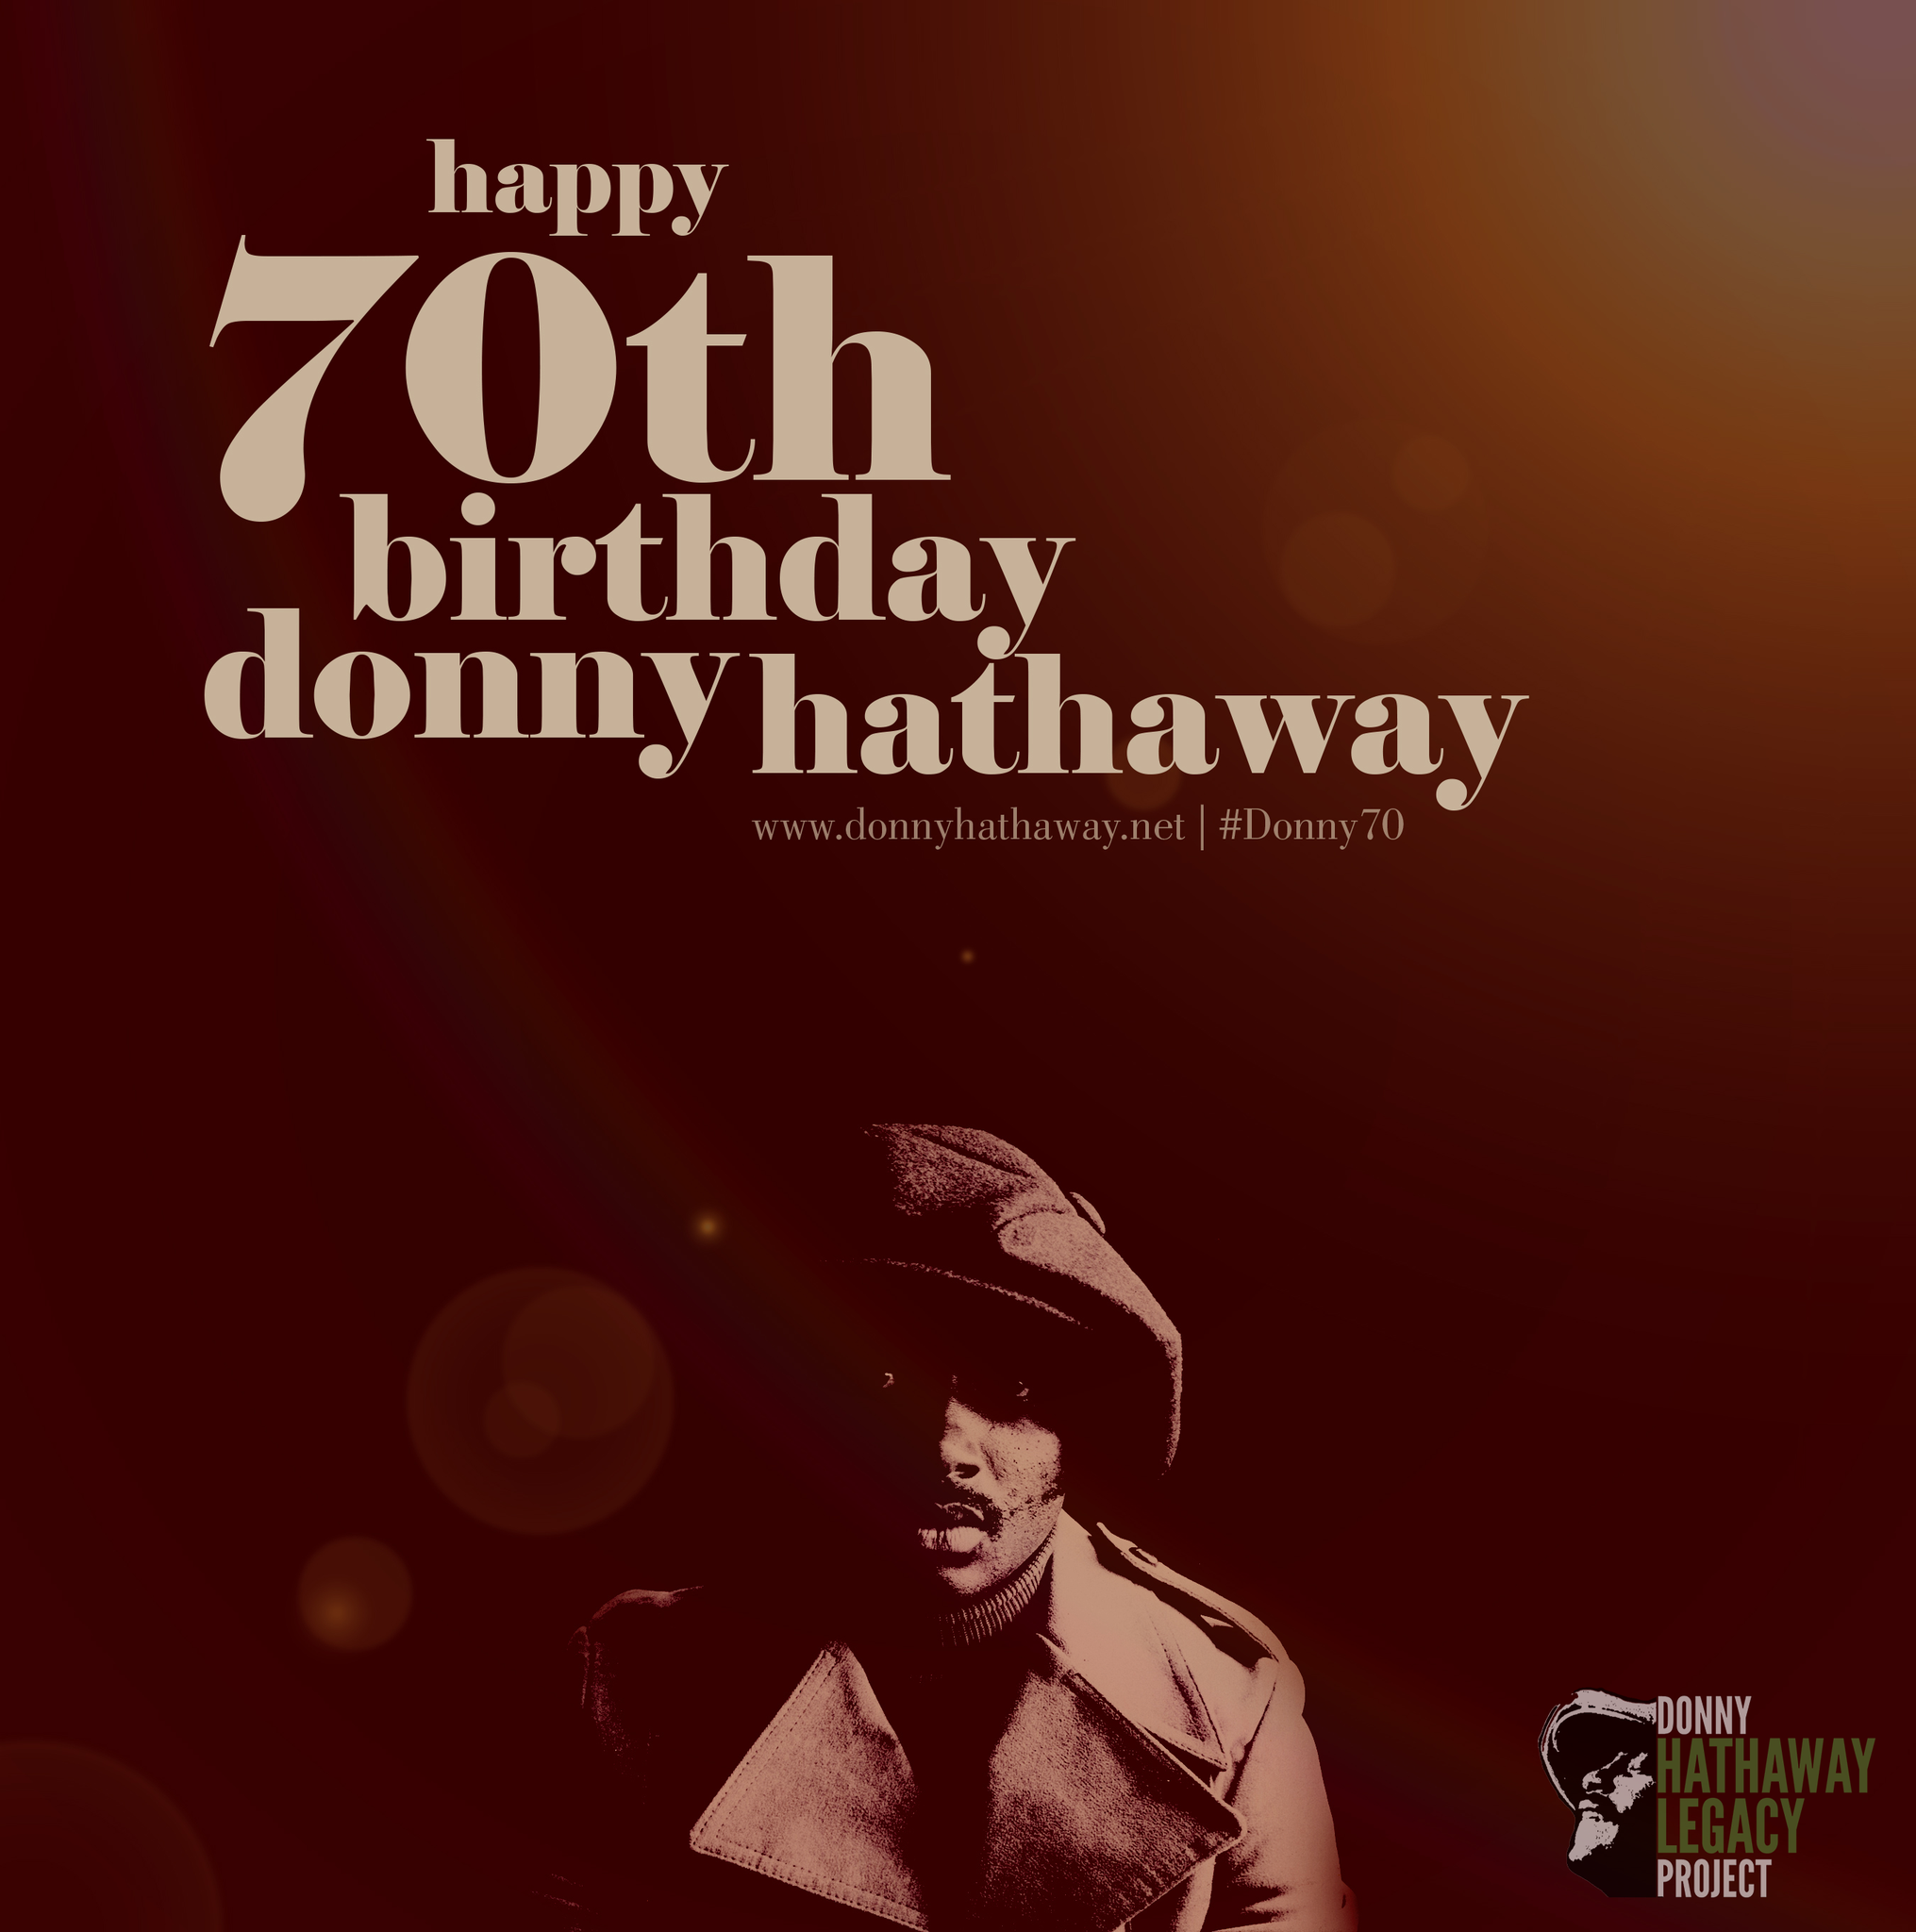 Happy Birthday, Donny Hathaway! Your music has inspired generations and will live in our hearts FOREVER! 